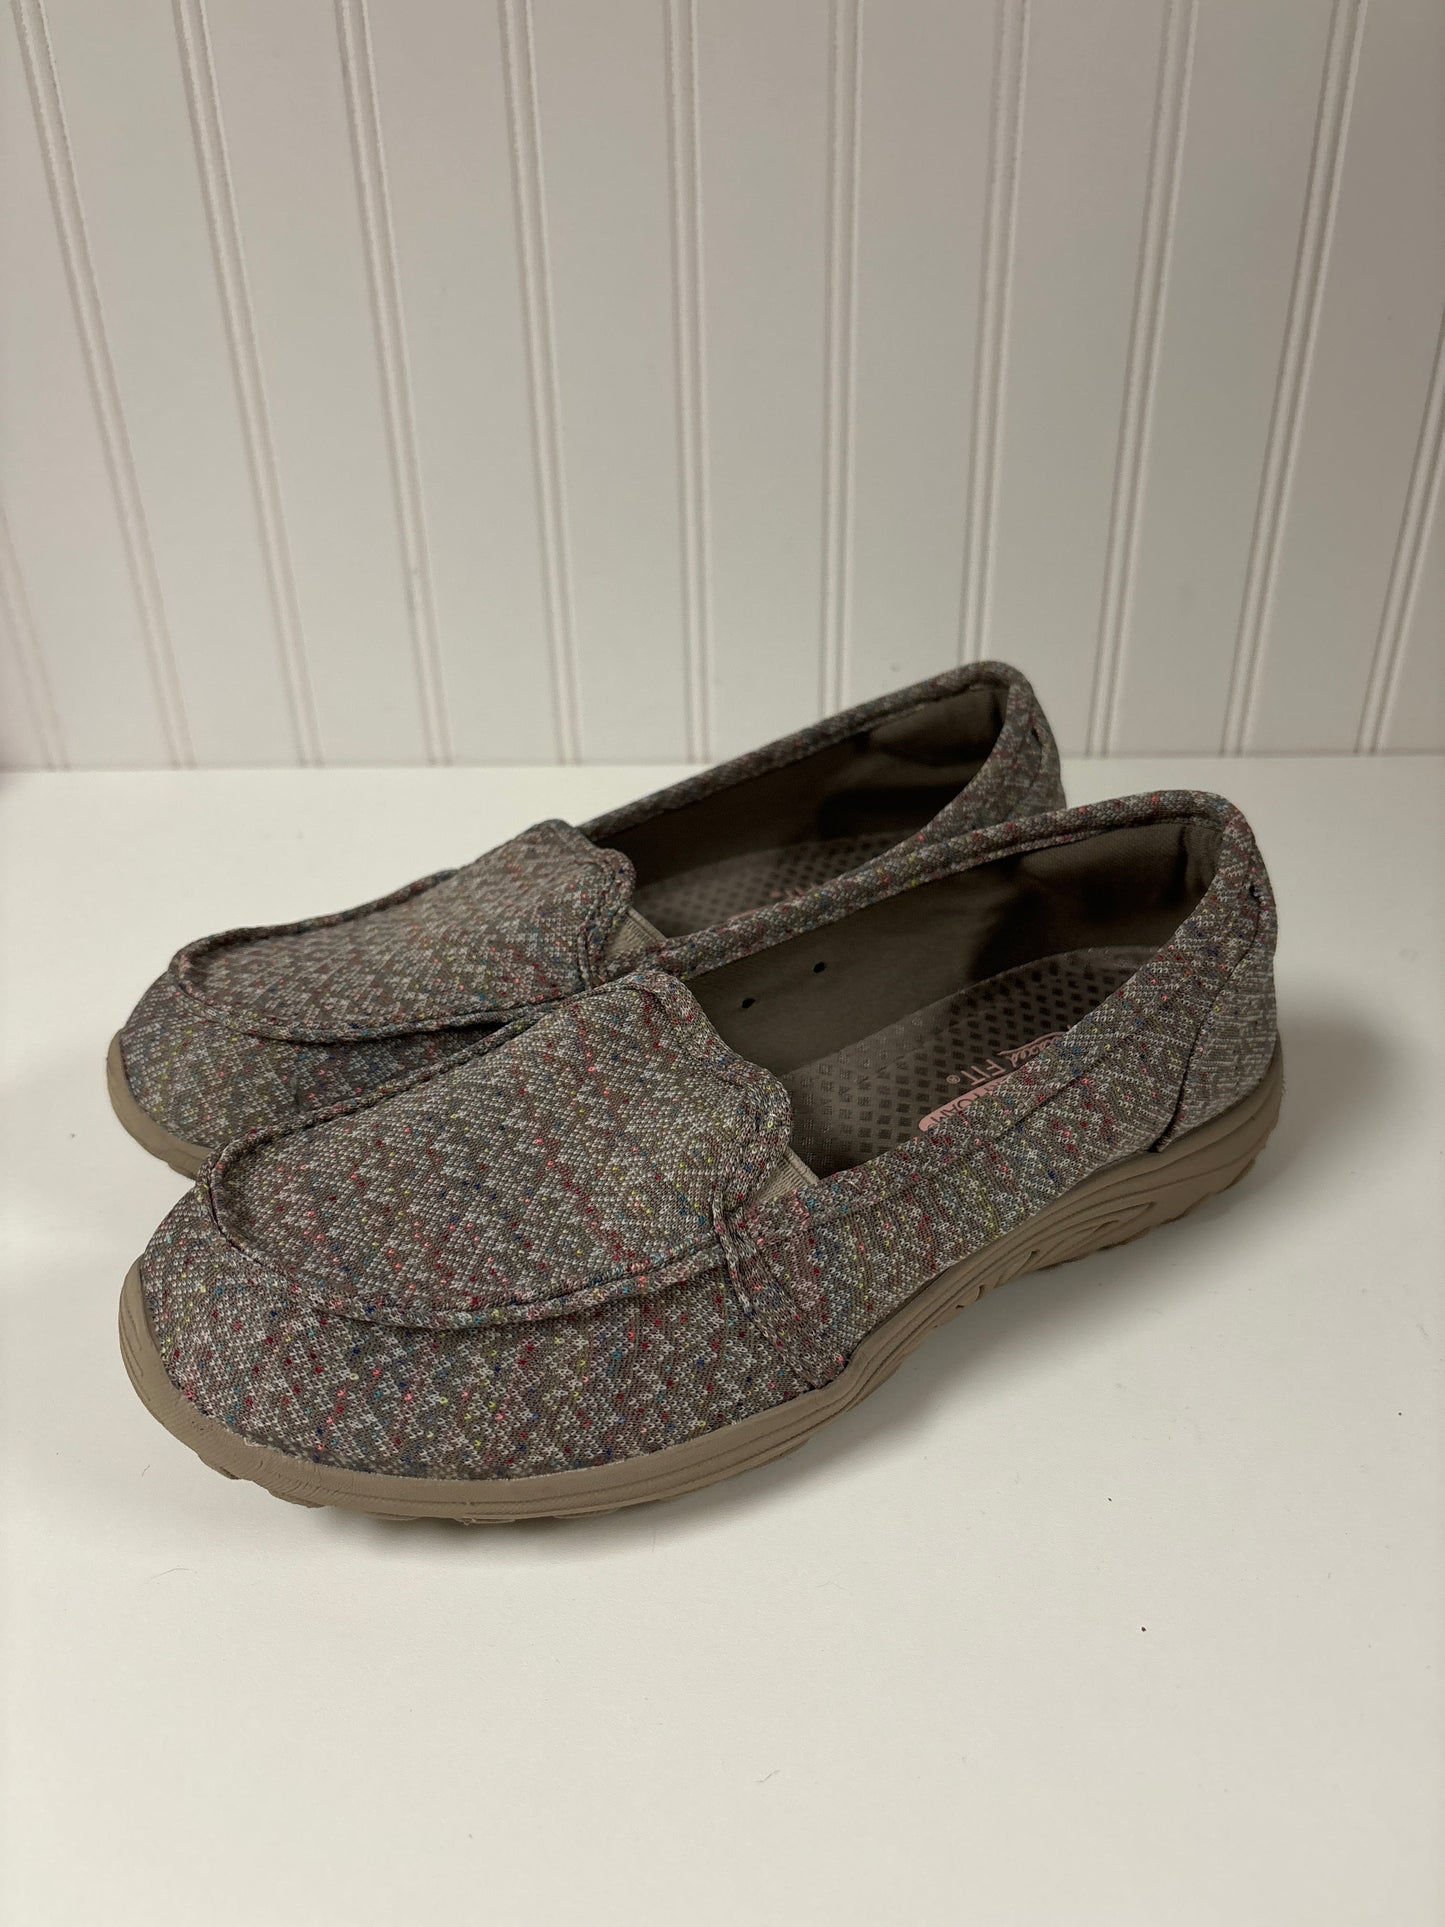 Taupe Shoes Flats Skechers, Size 8